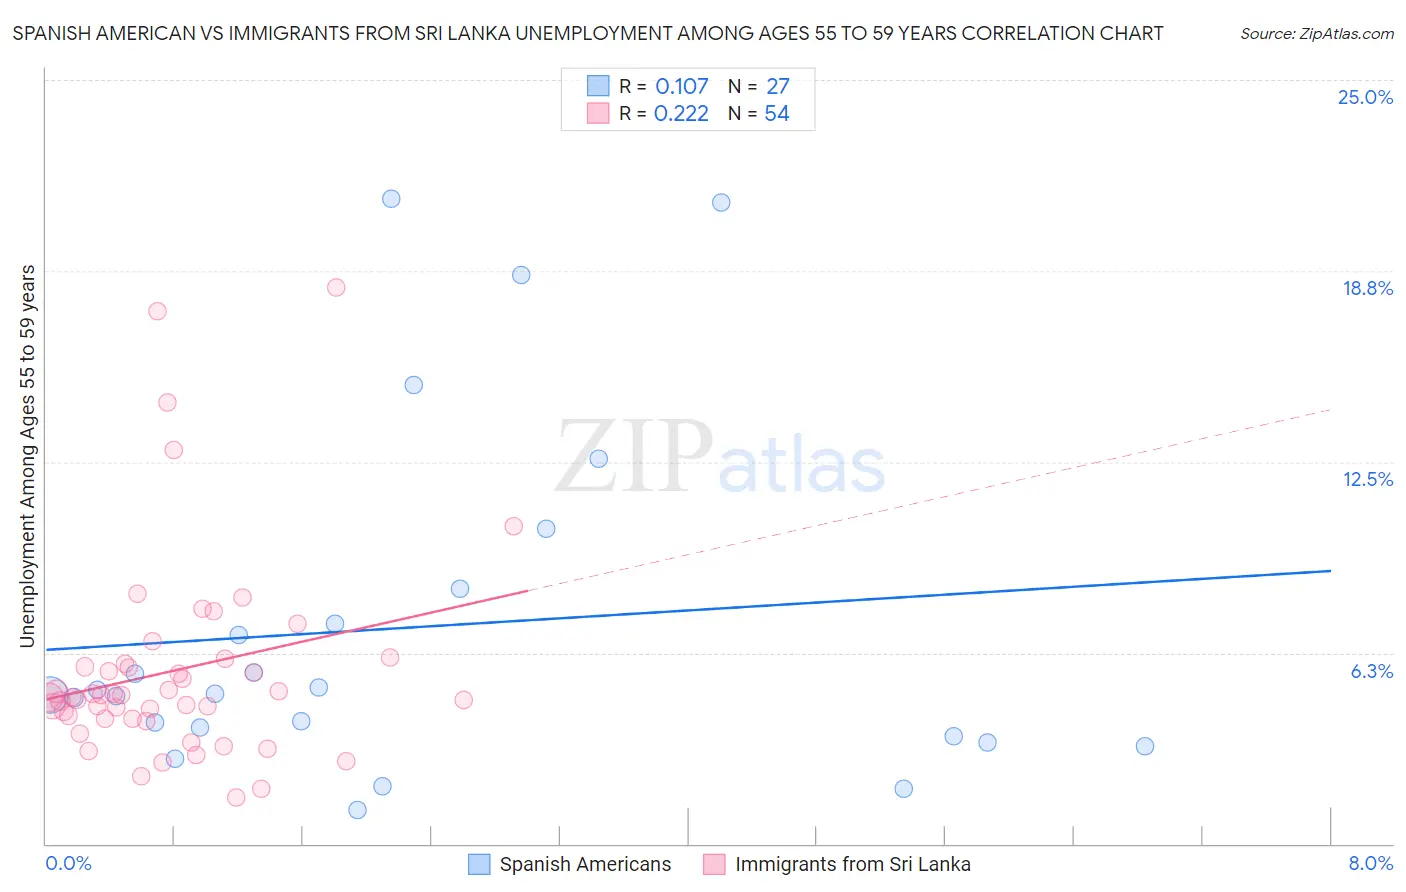 Spanish American vs Immigrants from Sri Lanka Unemployment Among Ages 55 to 59 years